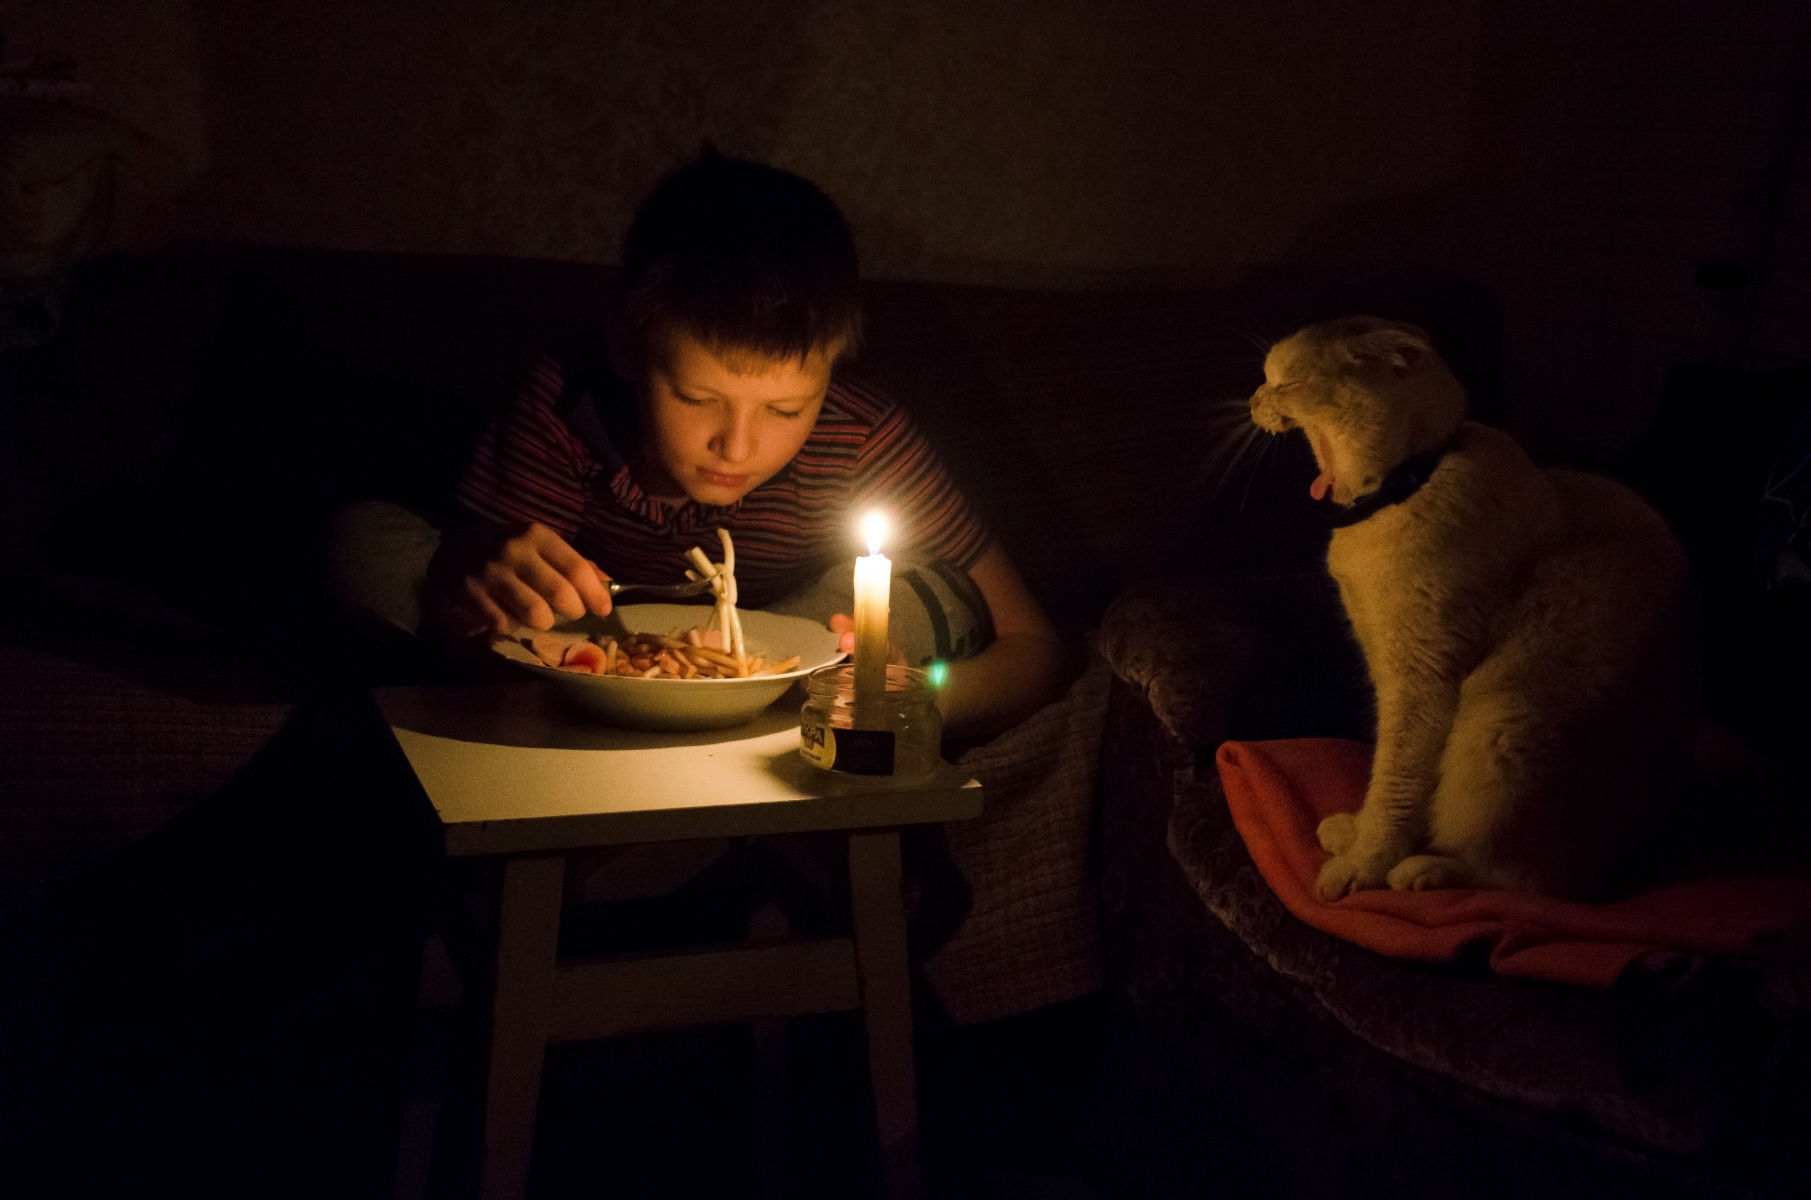 Nikita Alyabyev, 8, has dinner by candlelight with his cat at home in Simferopol, Crimea, Monday, Nov. 23, 2015. Two electricity transmission towers in Ukraine were damaged by explosions, leaving most of the nearly 2 million people on the disputed Crimean Peninsula without power on Sunday. (AP Photo/Anton Volk) CRIMEA ELECTRICITY